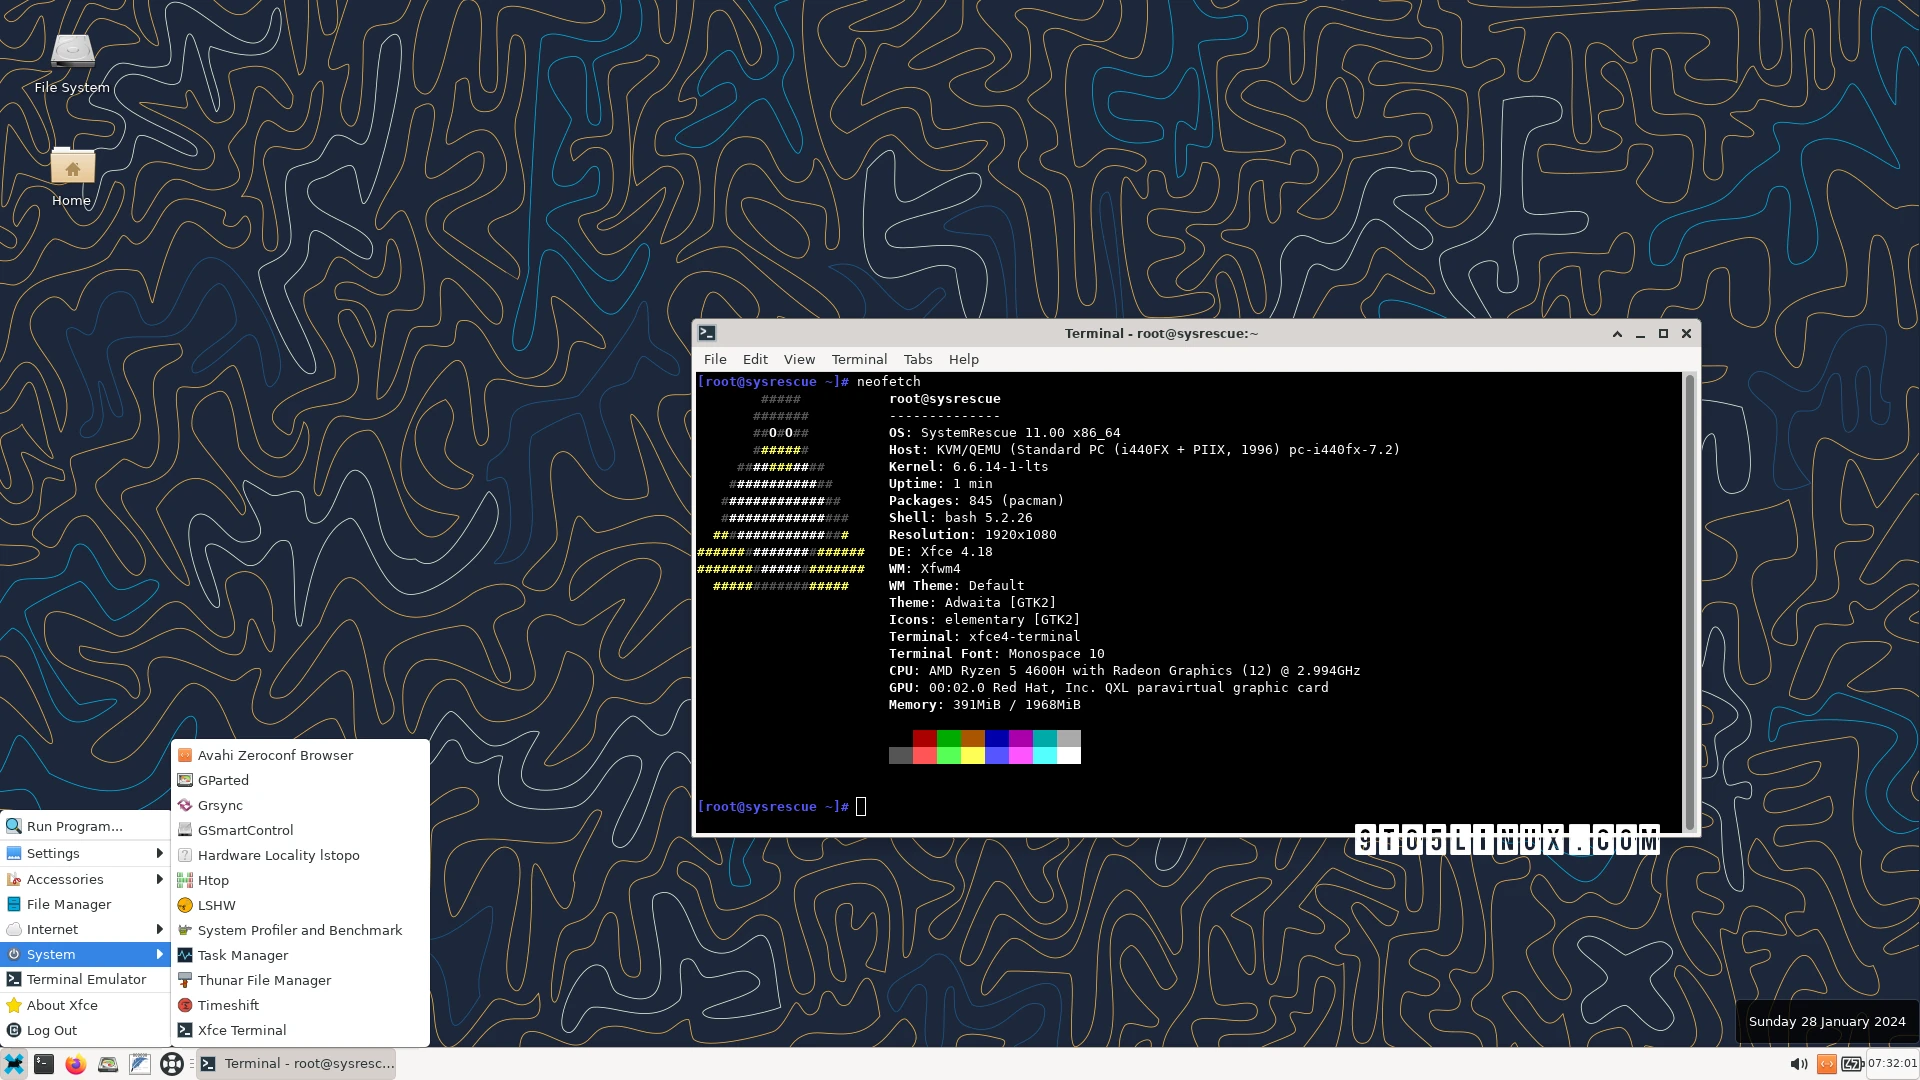 Arch Linux-Based SystemRescue 11 Released with Linux Kernel 6.6 LTS